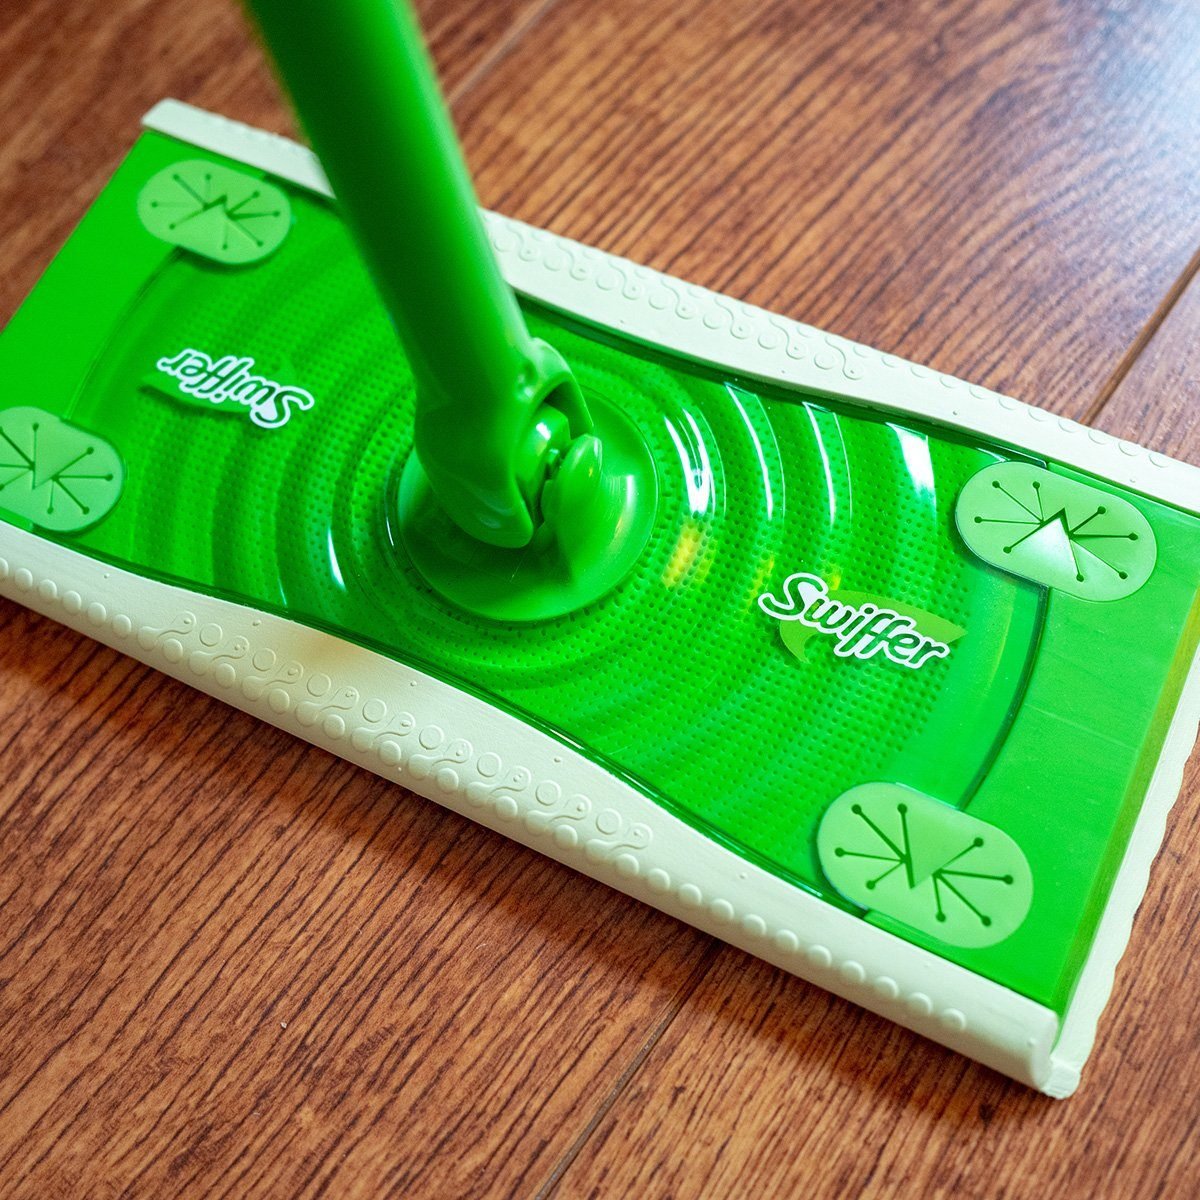 Clean With A Swiffer, Best Swiffer For Vinyl Floors